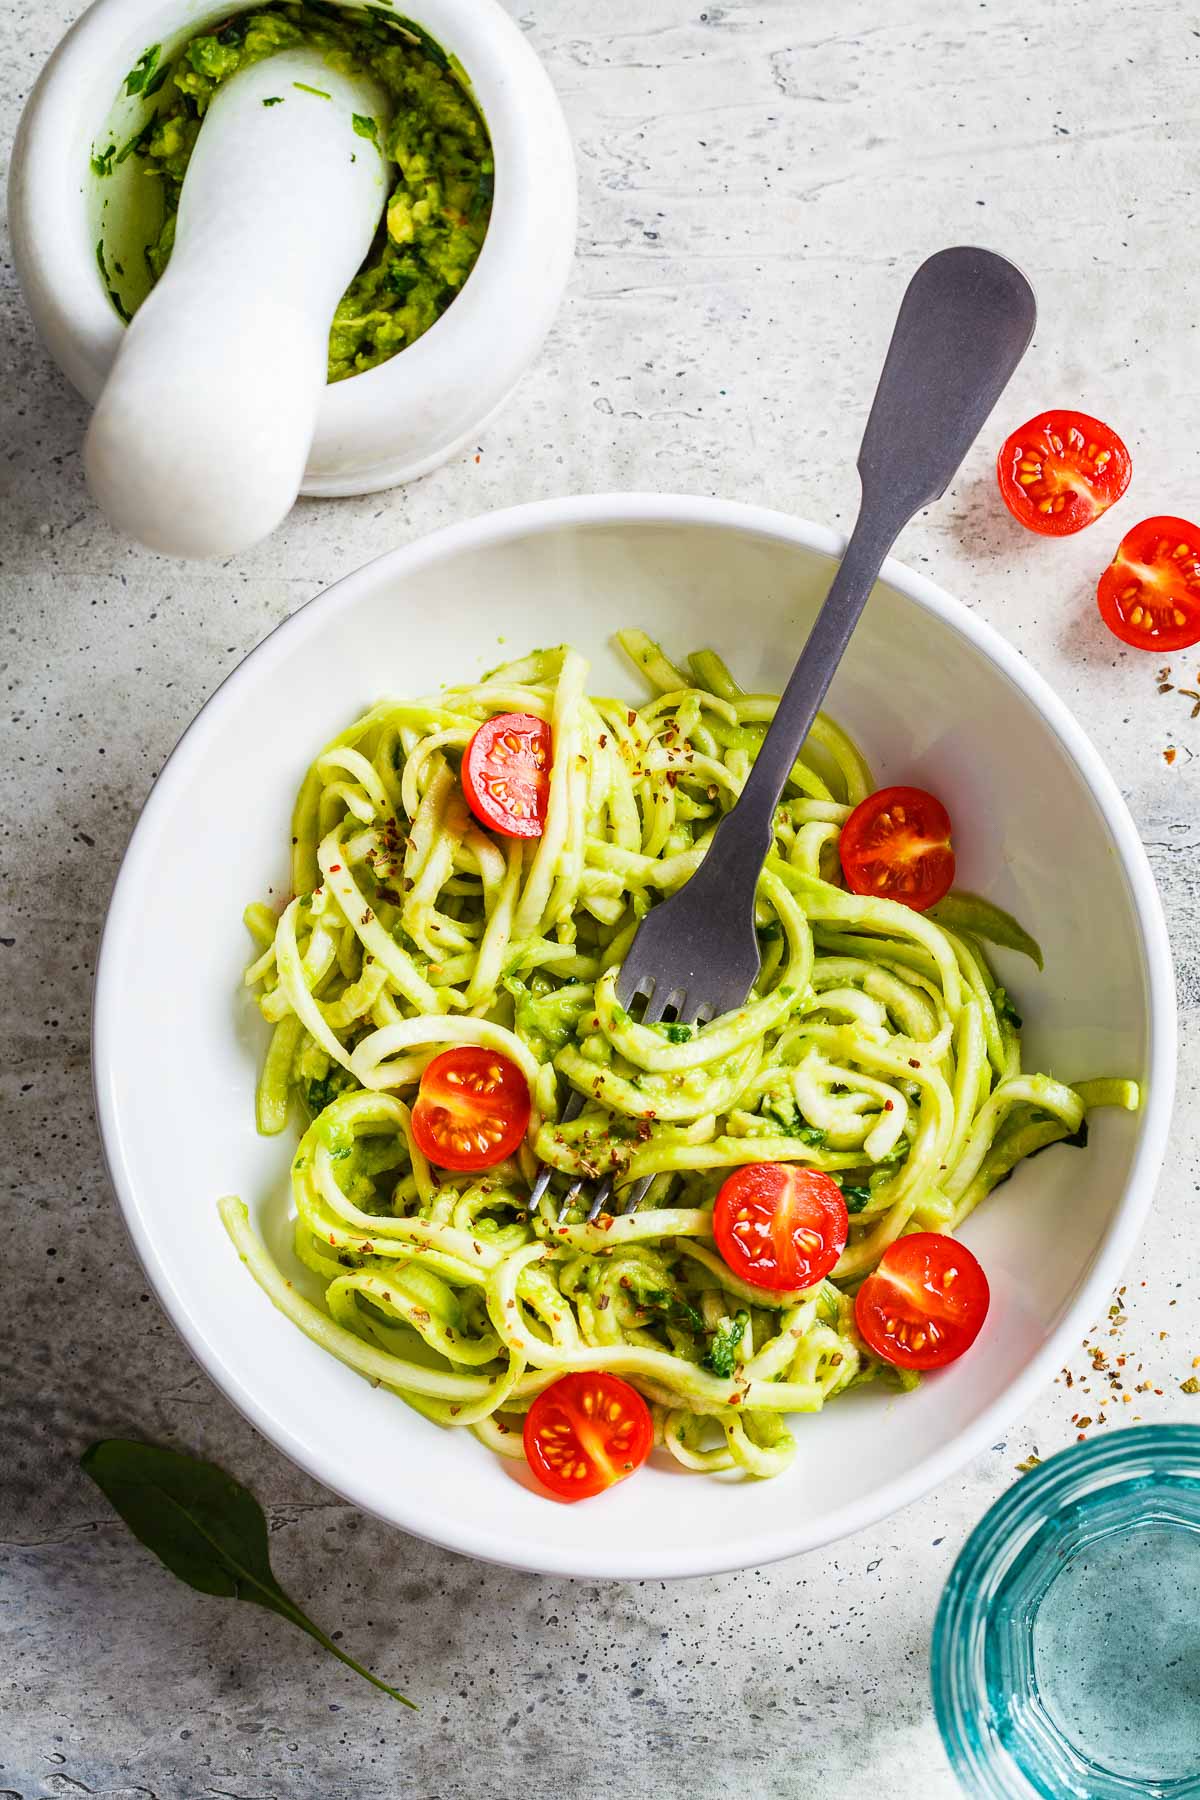 Zucchini pasta with pesto, avocado and tomatoes in white plate, top view.